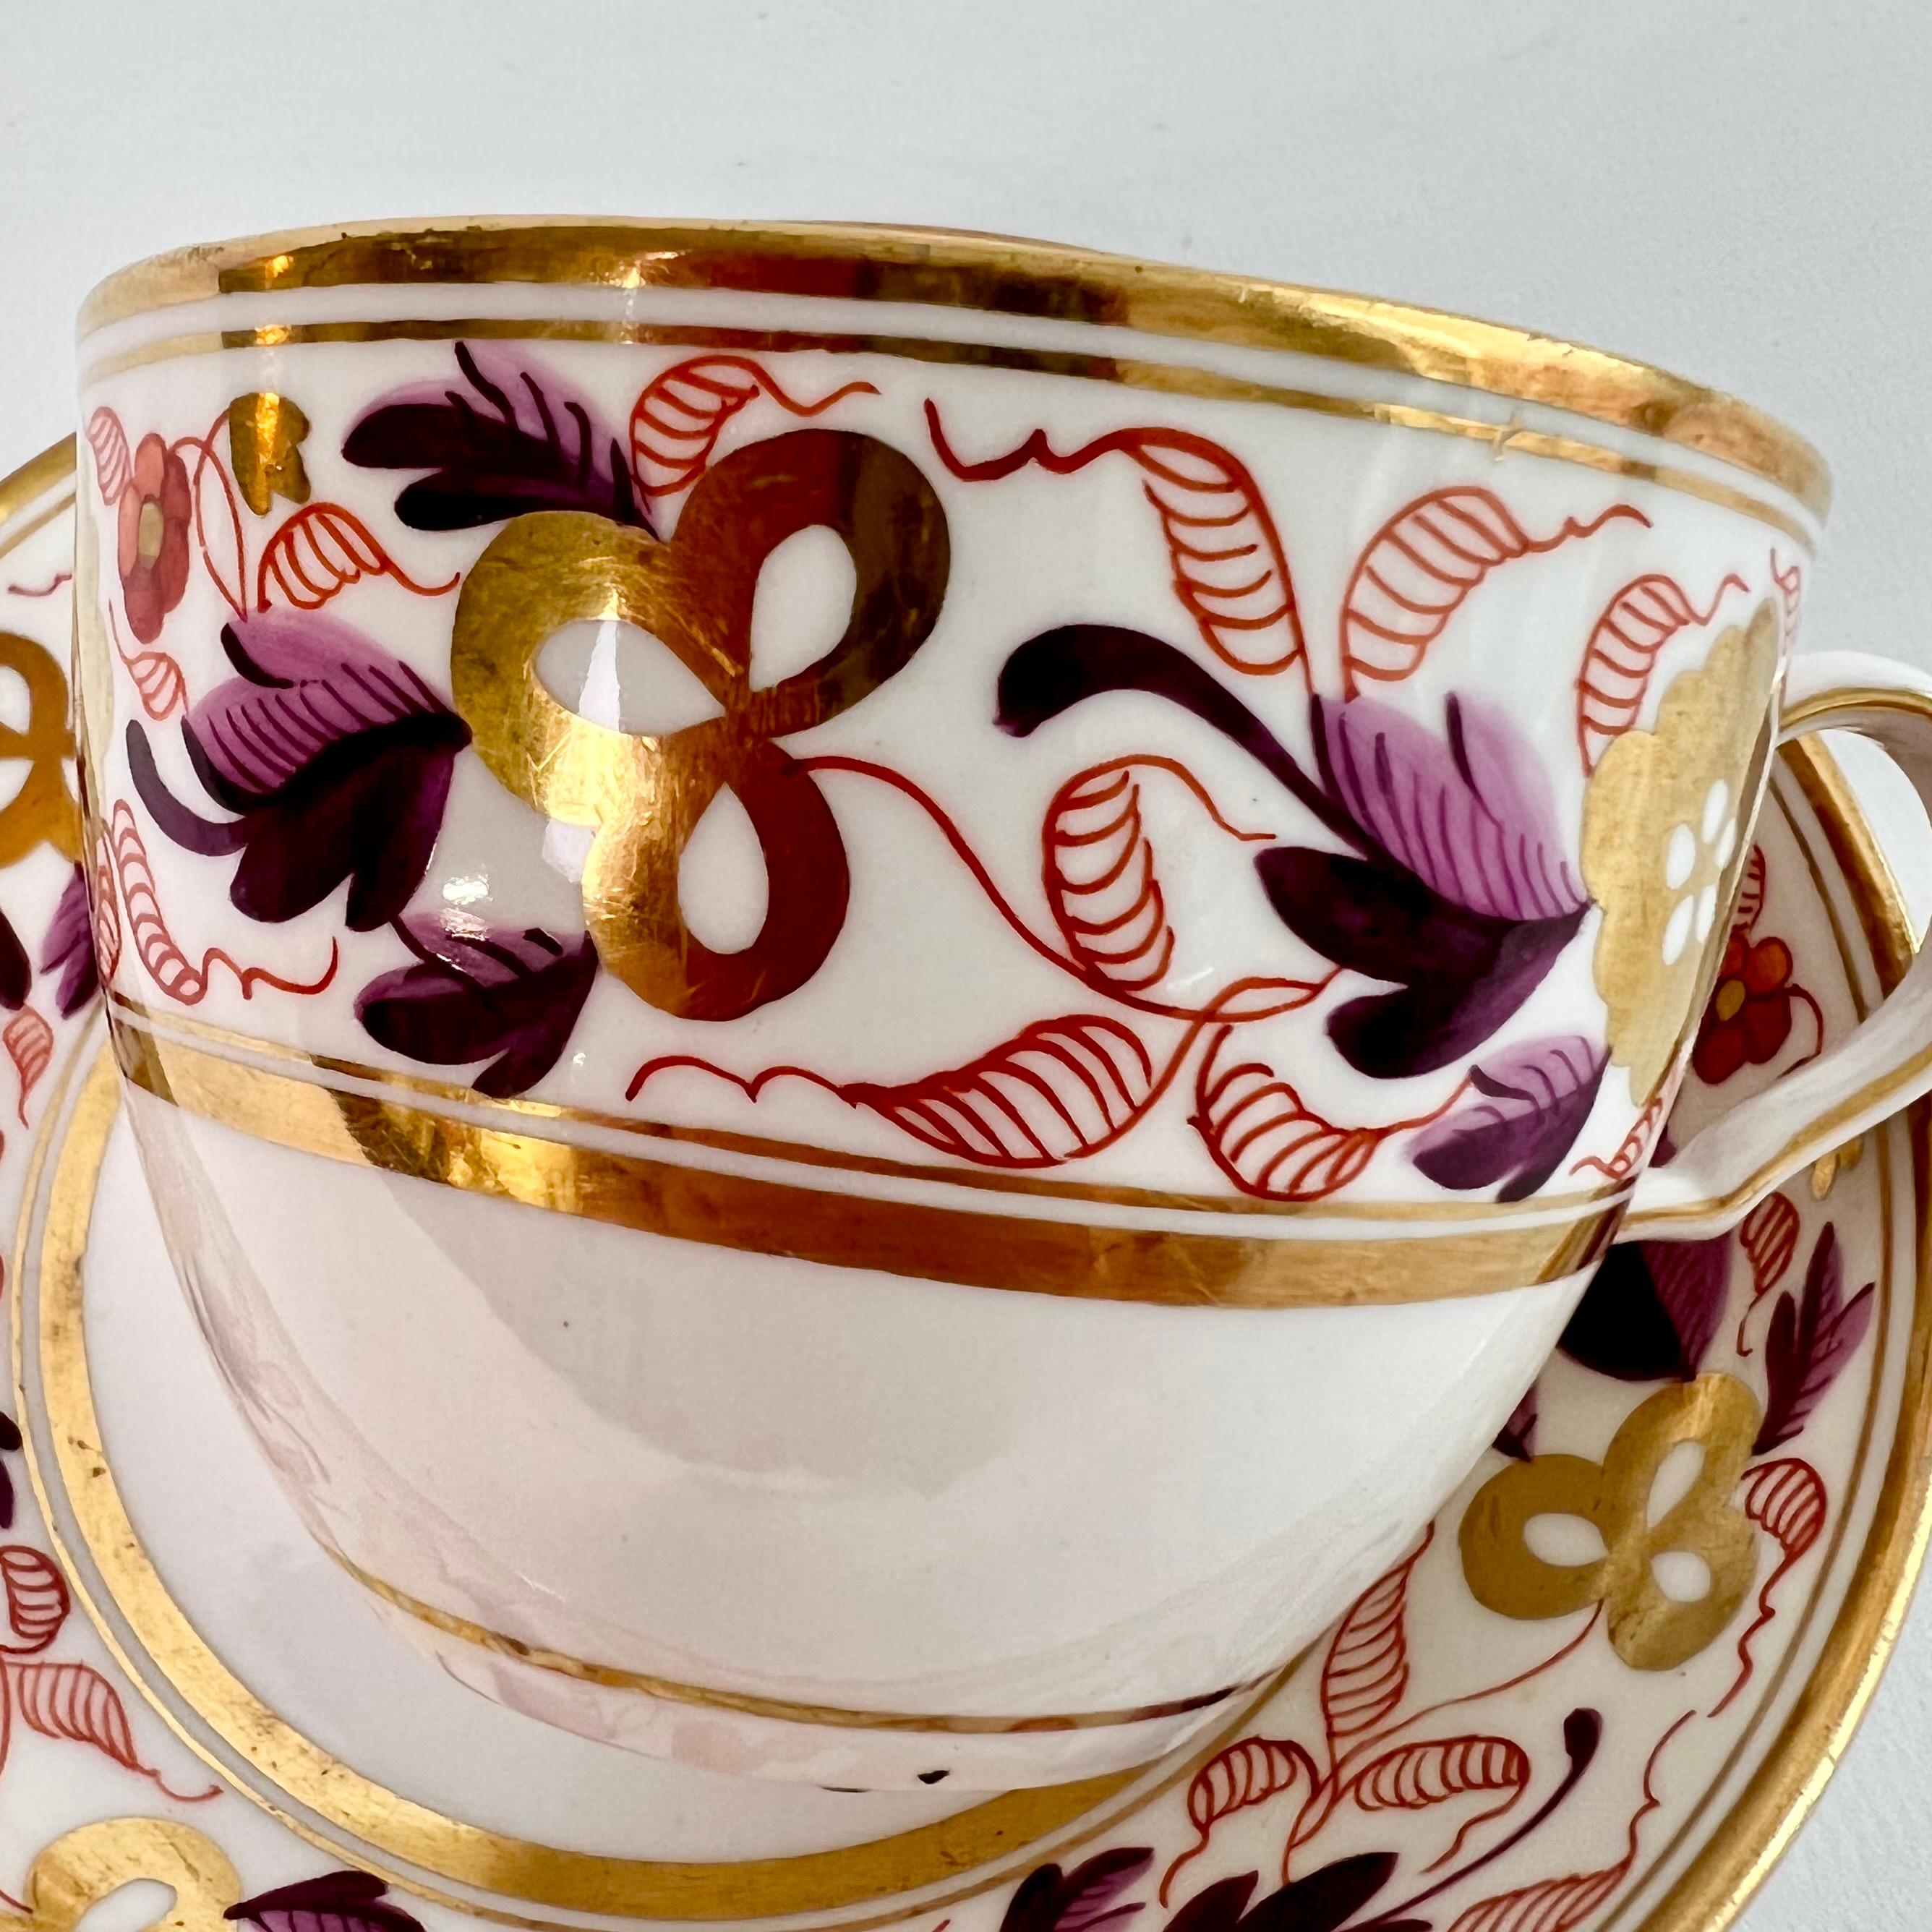 Spode Porcelain Teacup Trio, Puce and Gilt Floral Pattern, Neoclassical ca 1810 4